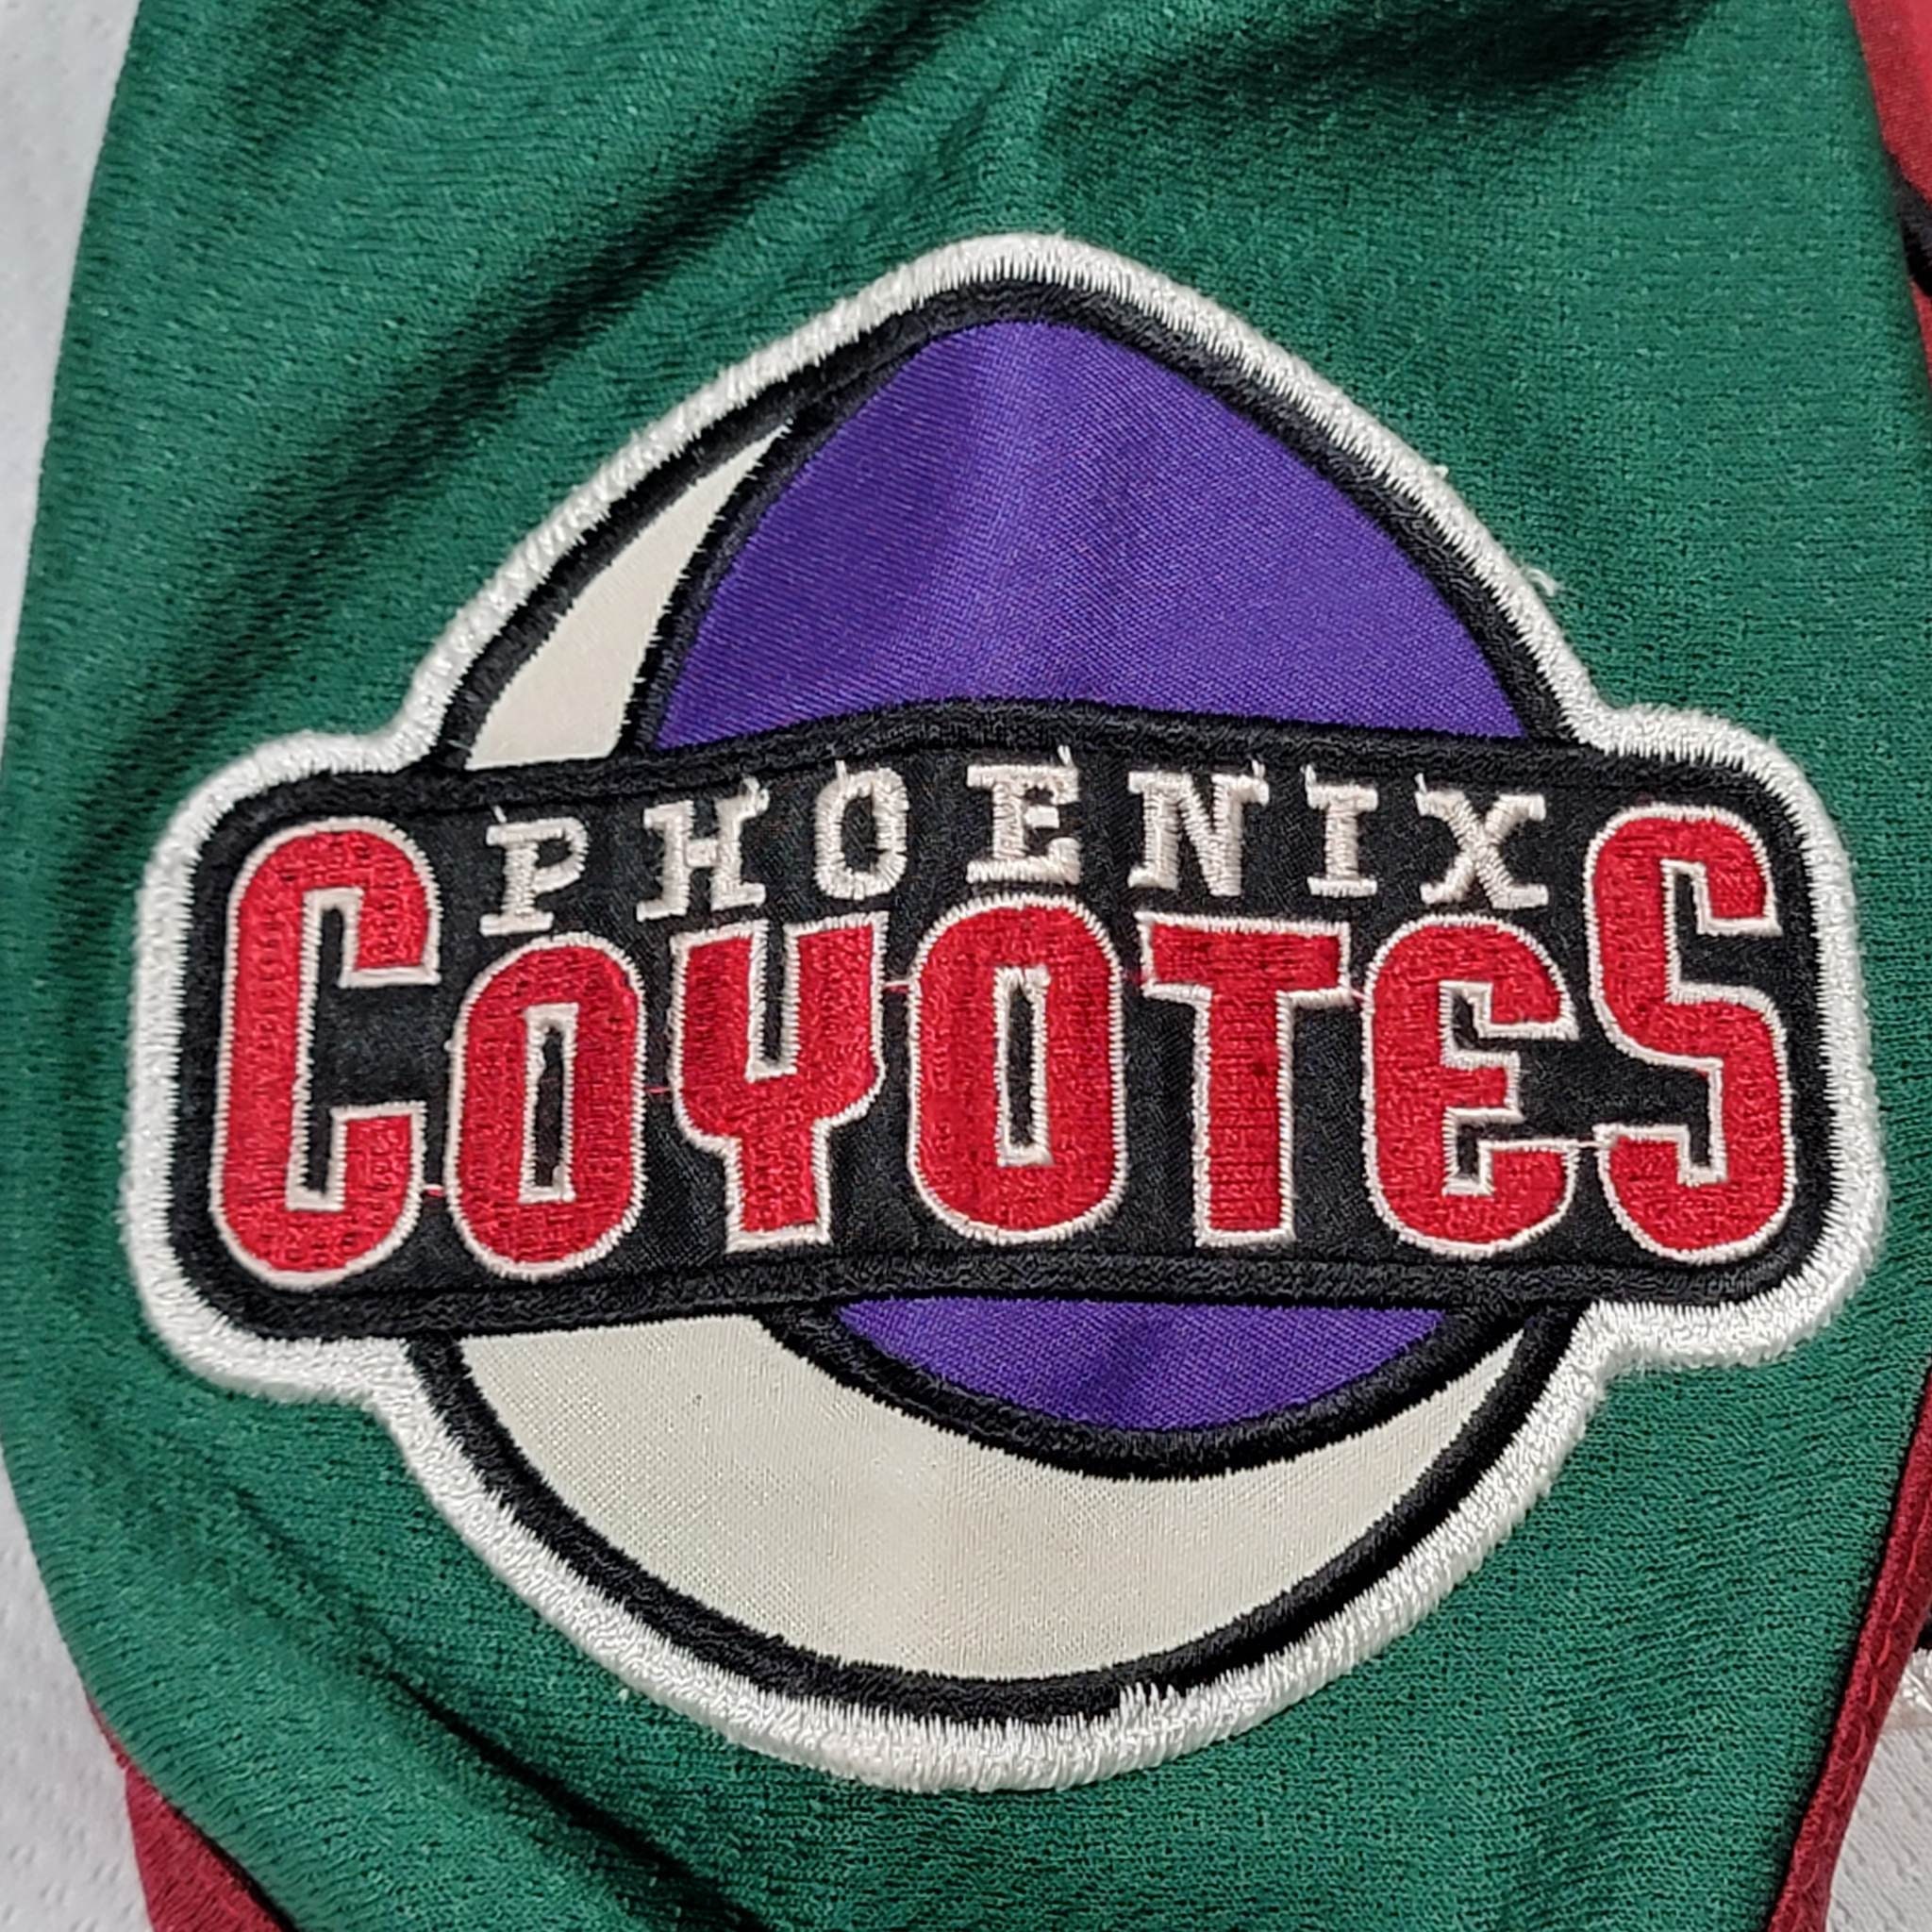 Coyotes reveal jersey that hearkens back to 1999-2003 seasons